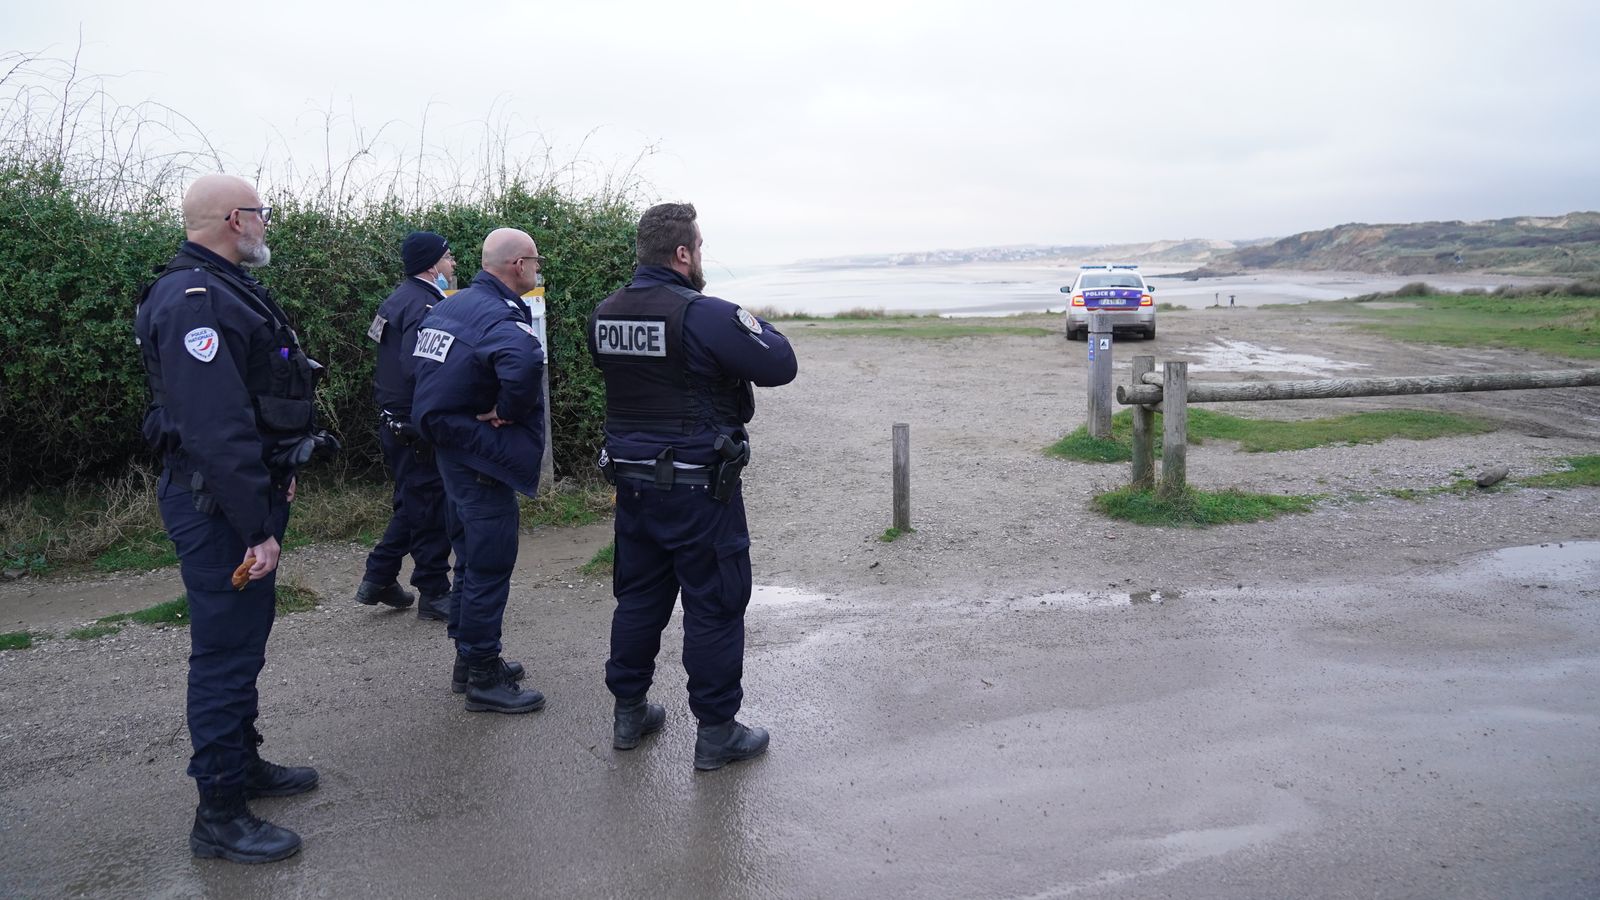 Ten people in custody in France over deaths of 27 migrants in the English Channel